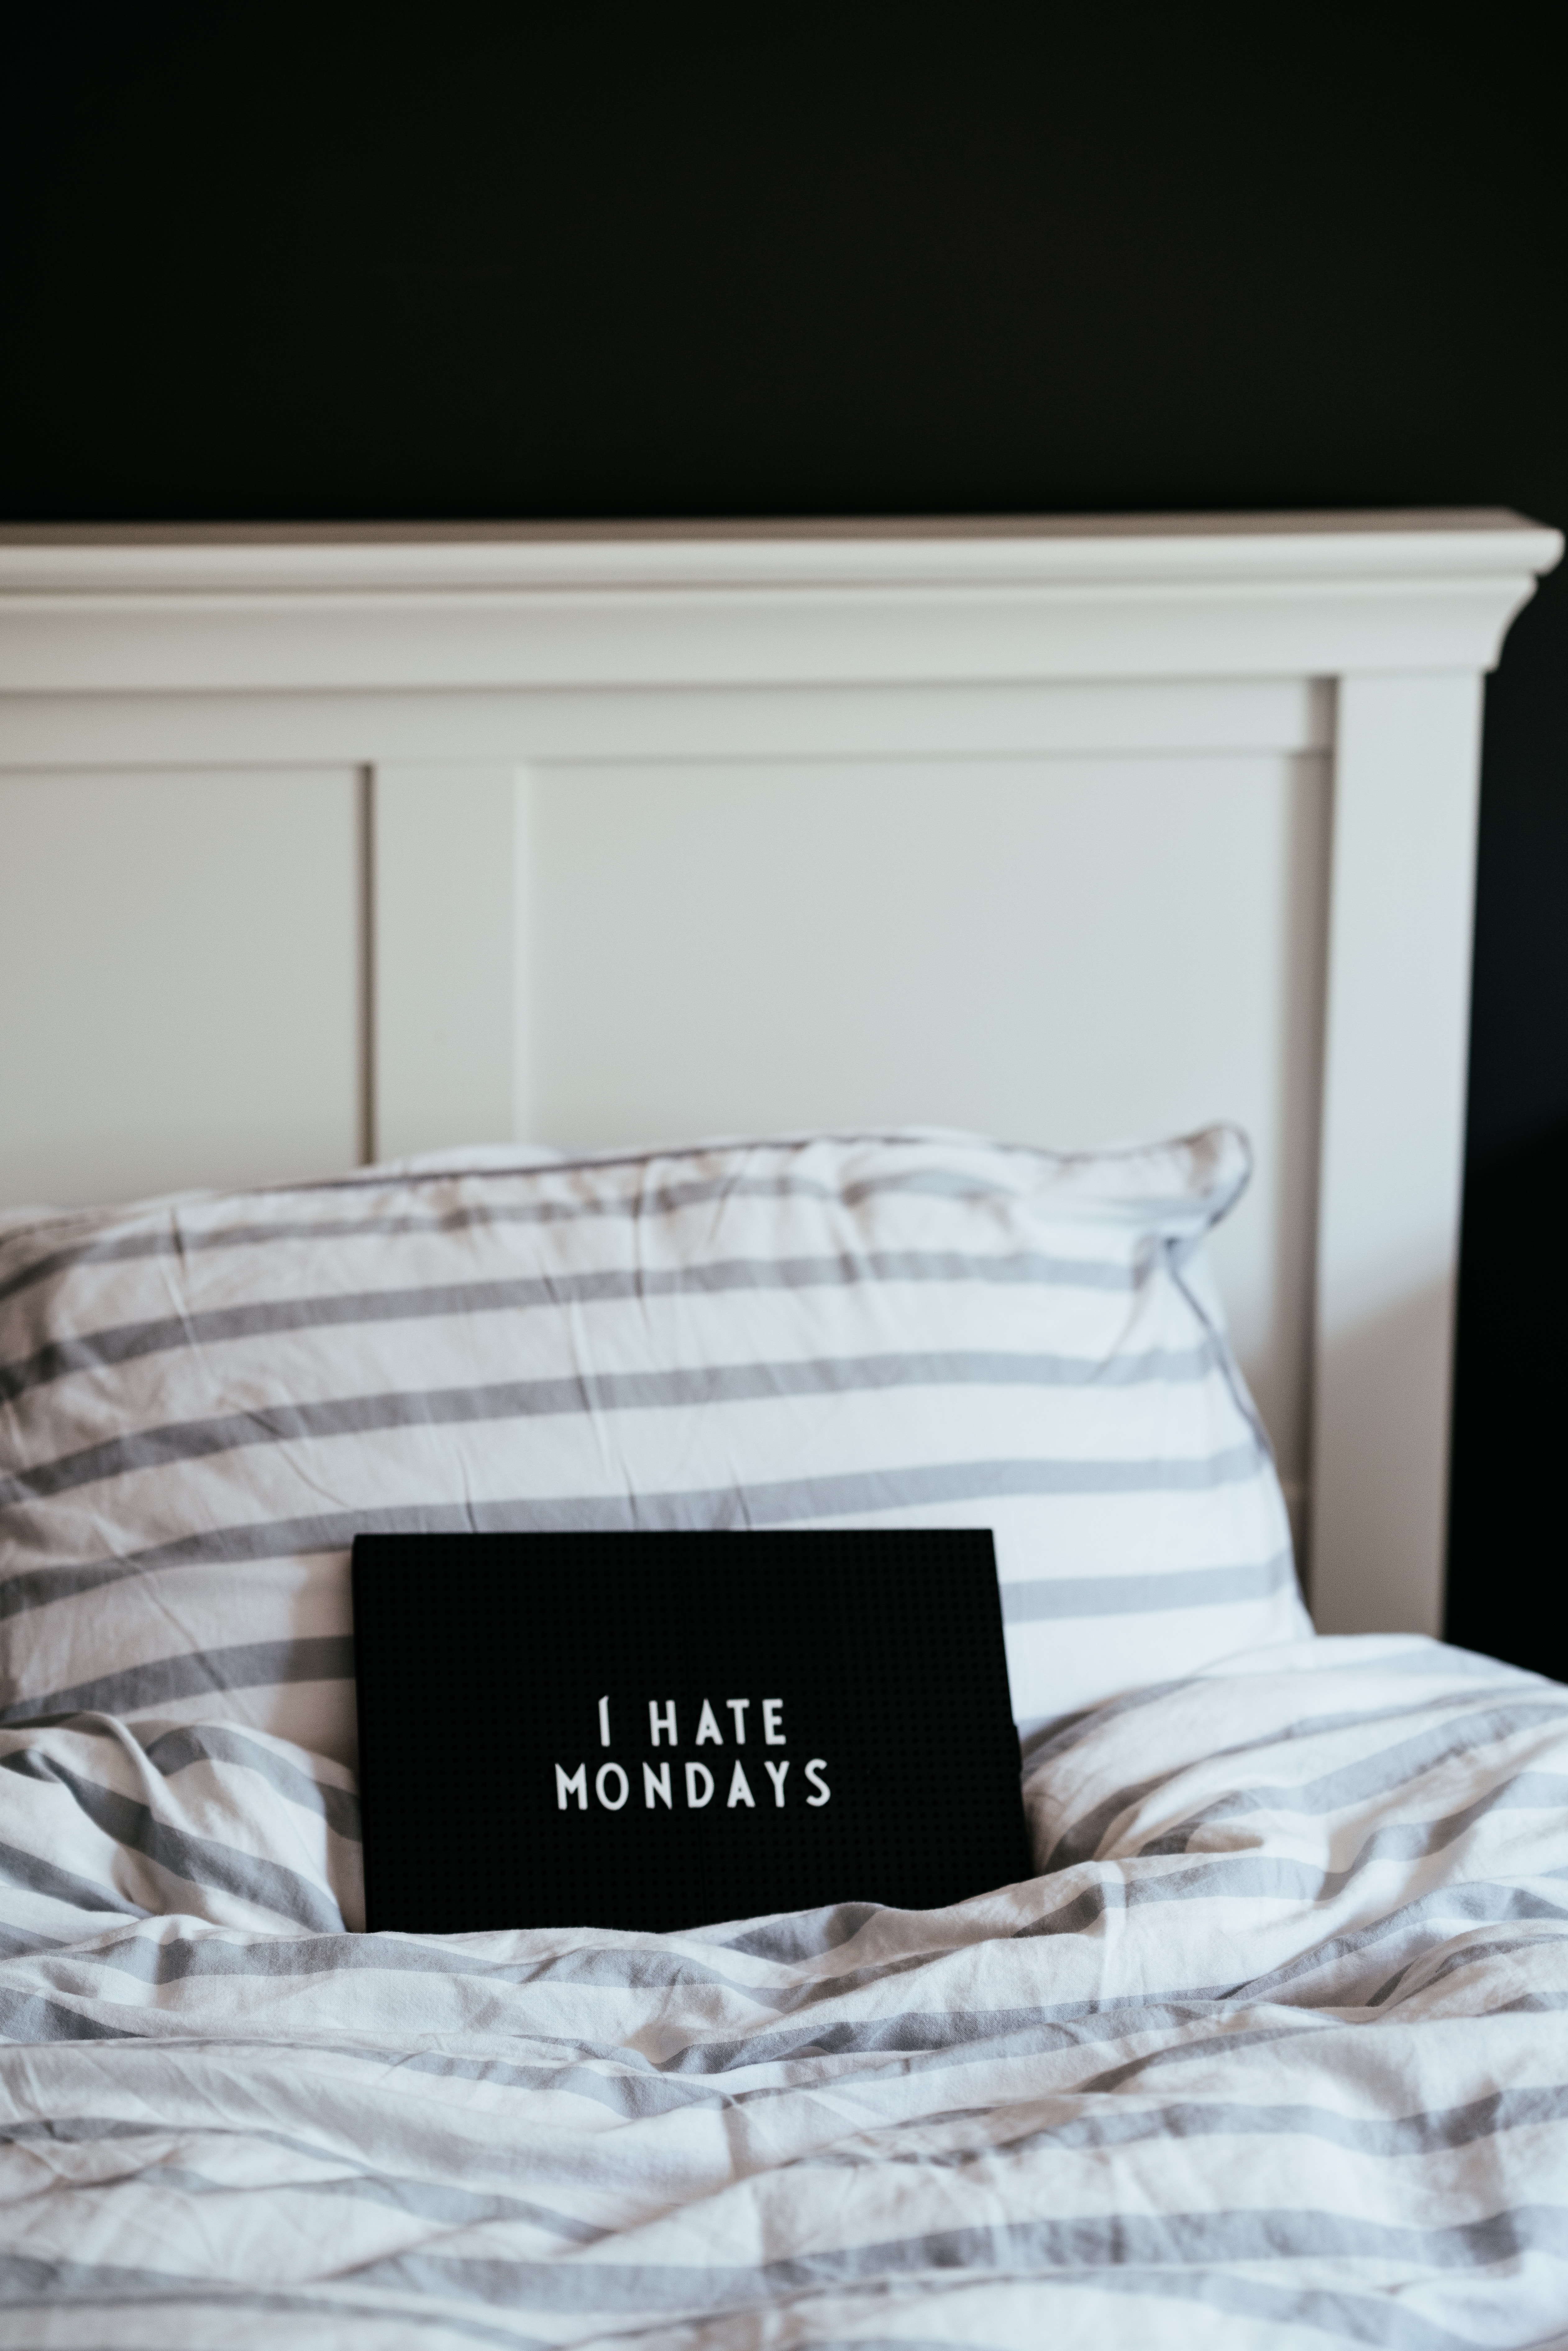 nameplate, words, inscription, plate, bed, hatred, monday